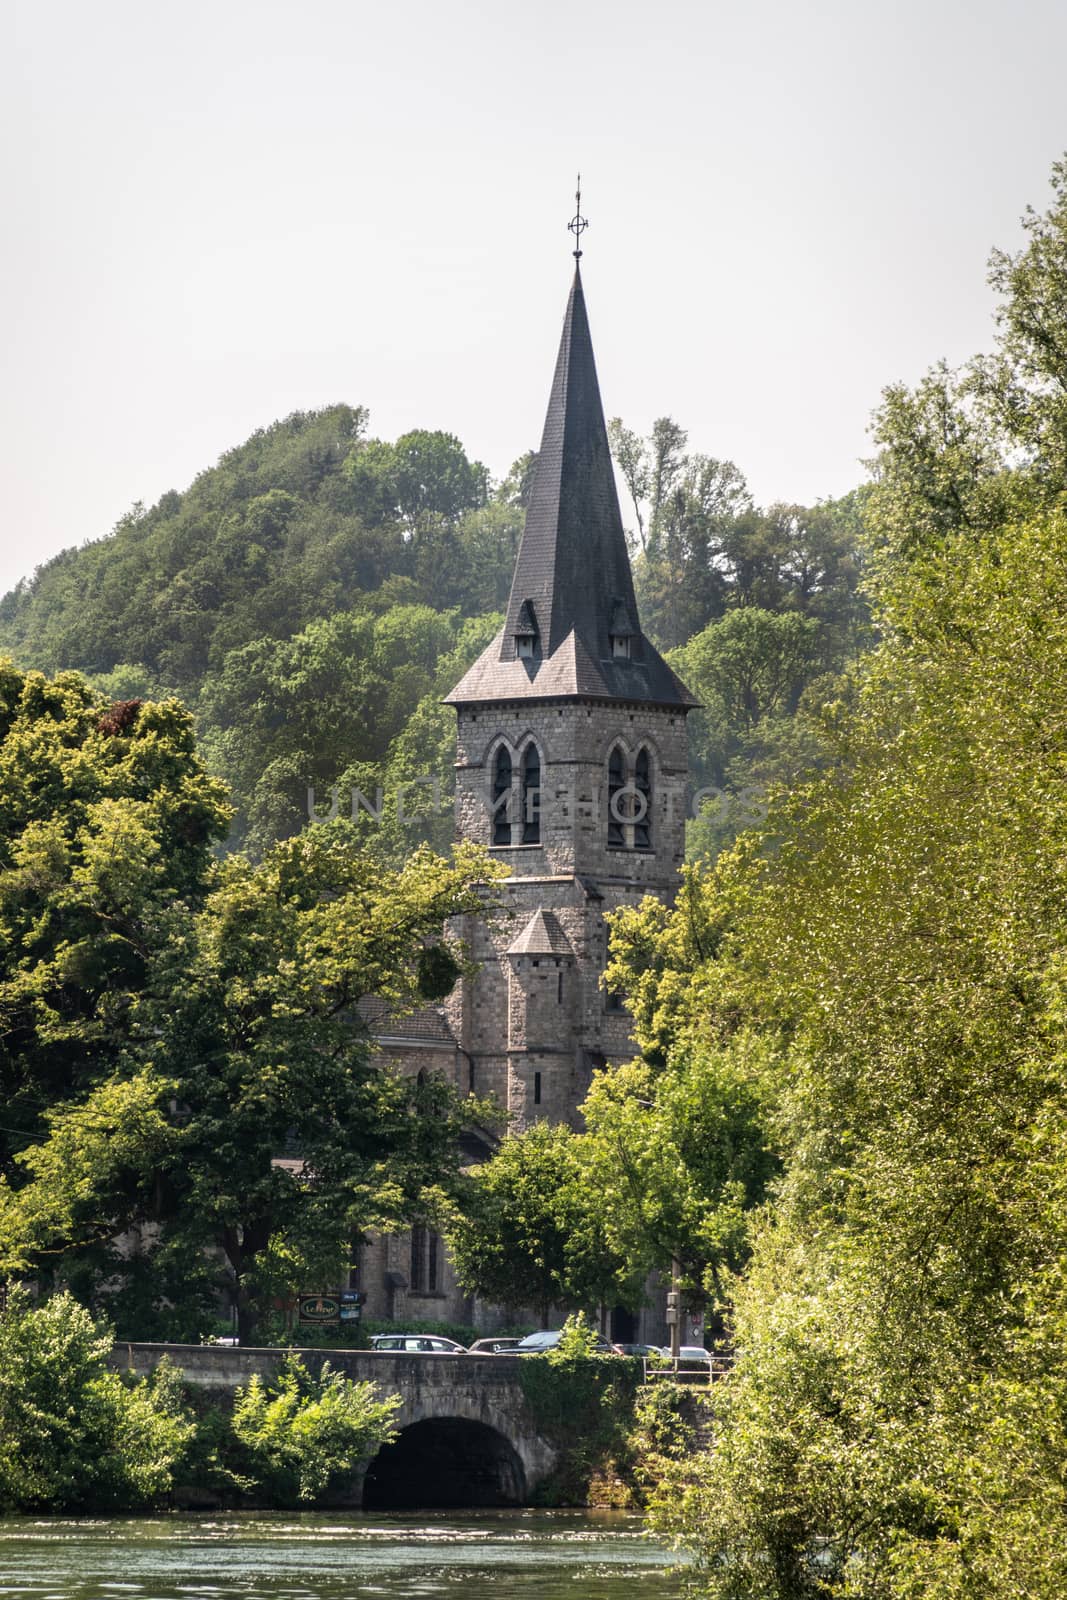 Dinant, Belgium - June 26, 2019: Gray stone tower and spire of Saint Anne church surrounded by trees and green foliage under silver sky. Old roman bridge over Lesse River.